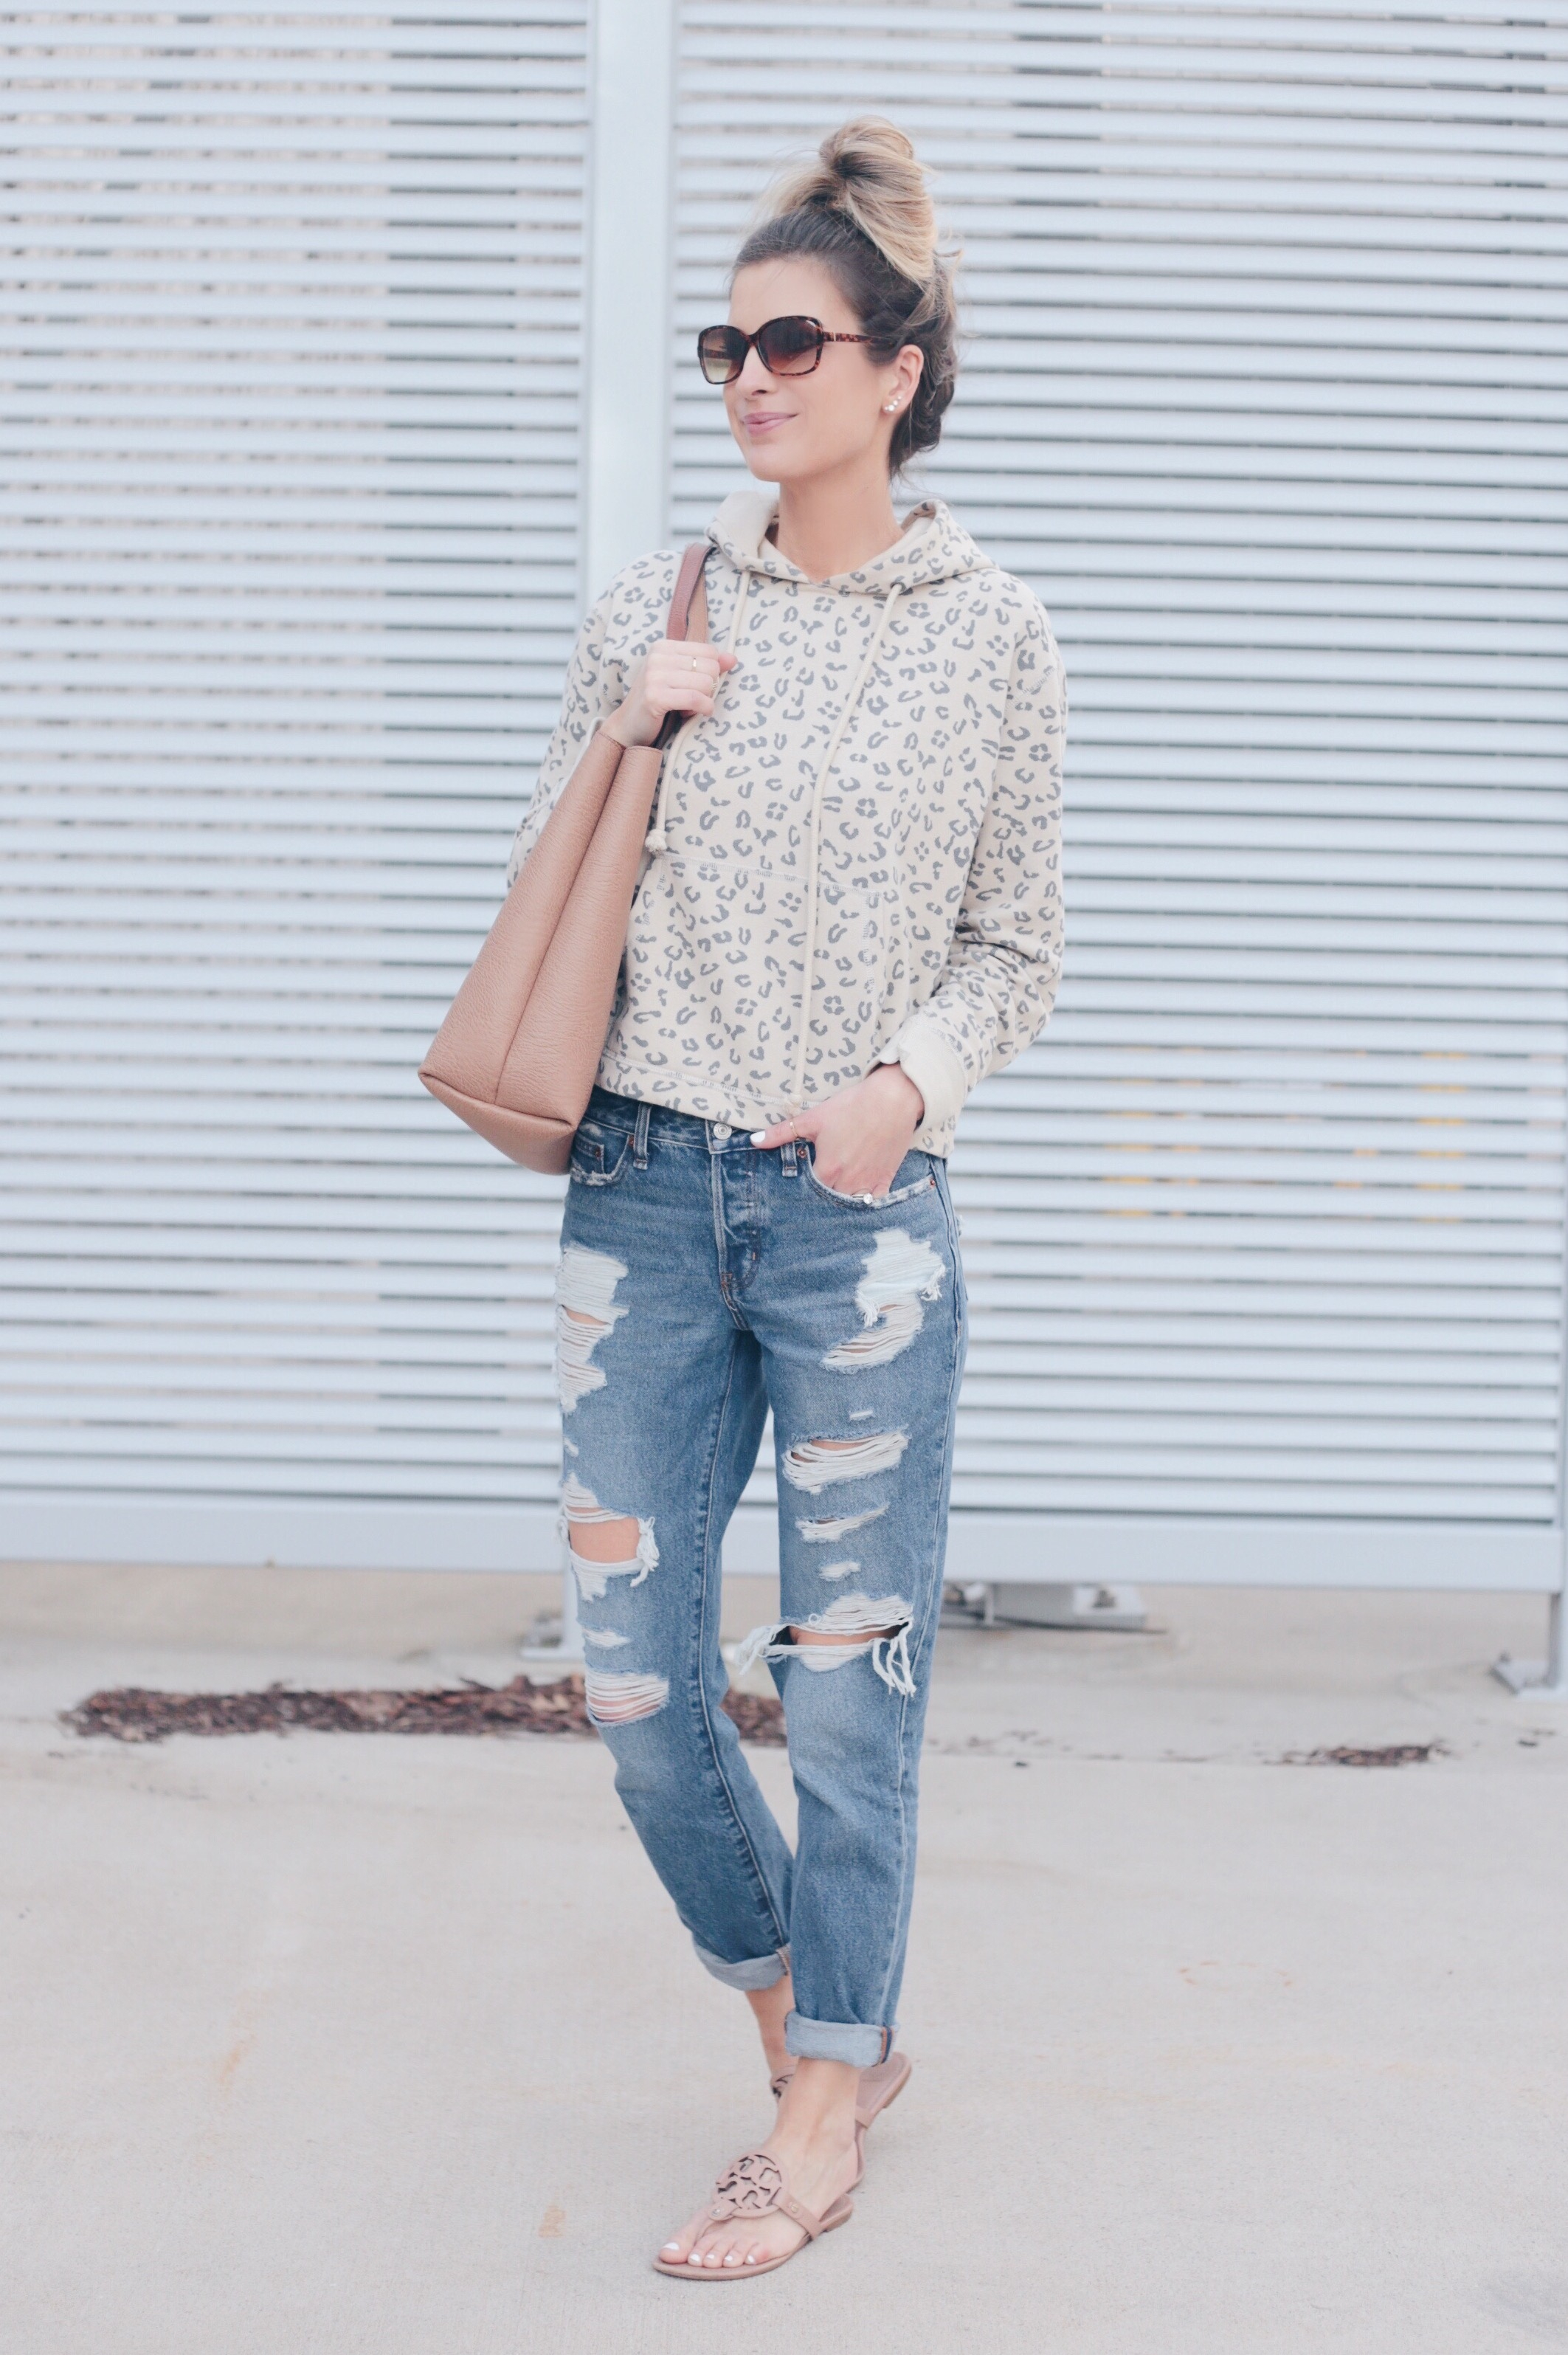 Spring Transition Outfits With Denim Boyfriend Jeans Outfit Ideas On Pinteresting Plans Blog Pinteresting Plans